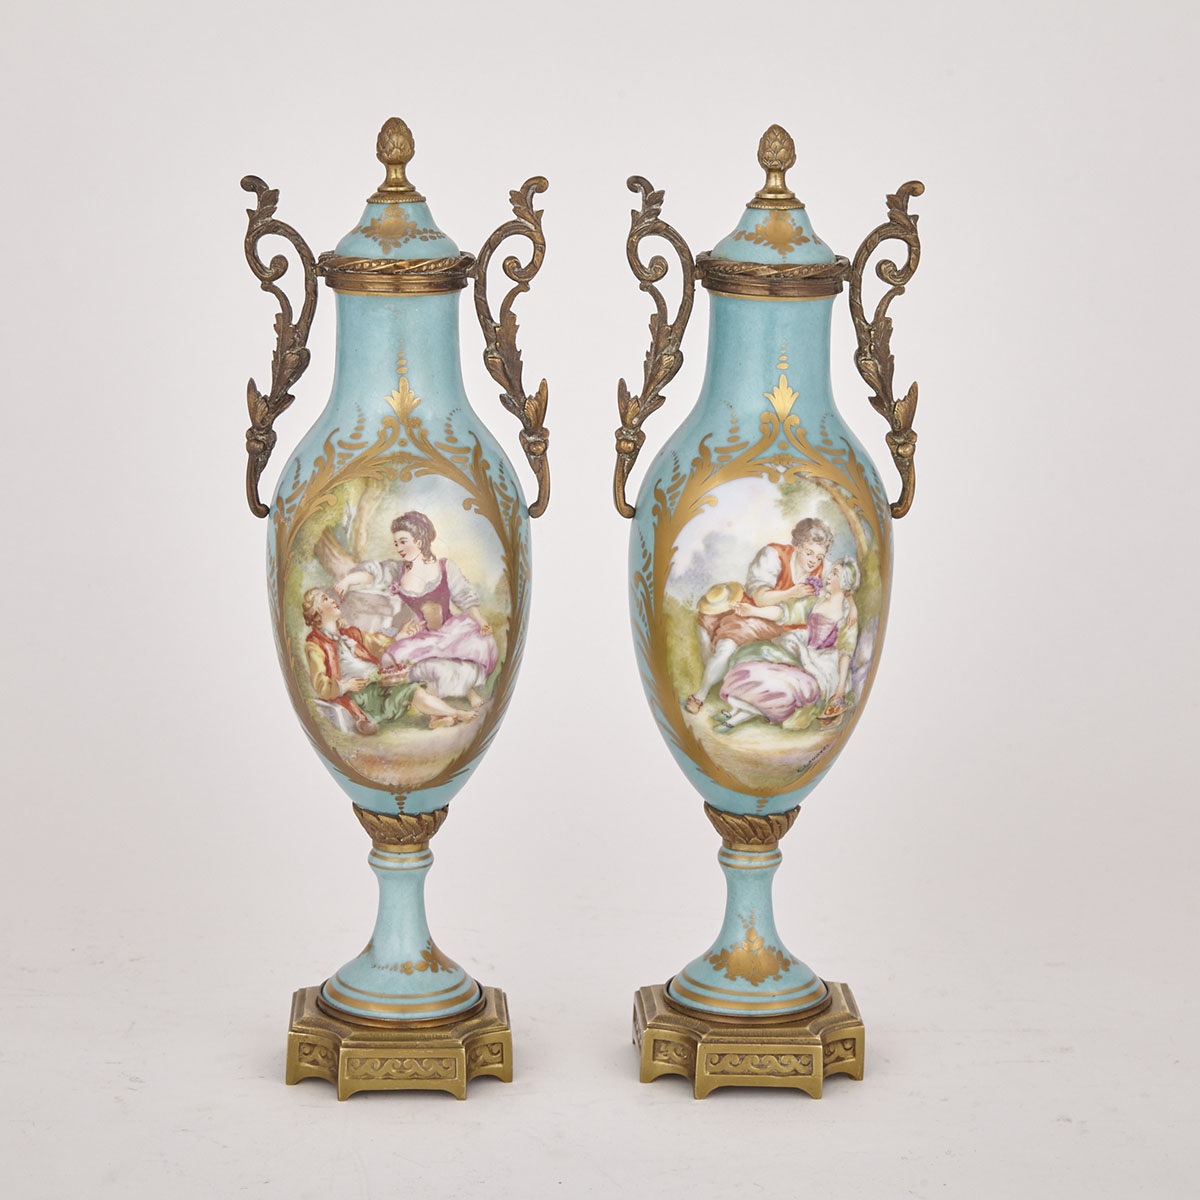 Pair of Ormolu Mounted ‘Sèvres’ Mantle Urns, mid-20th century